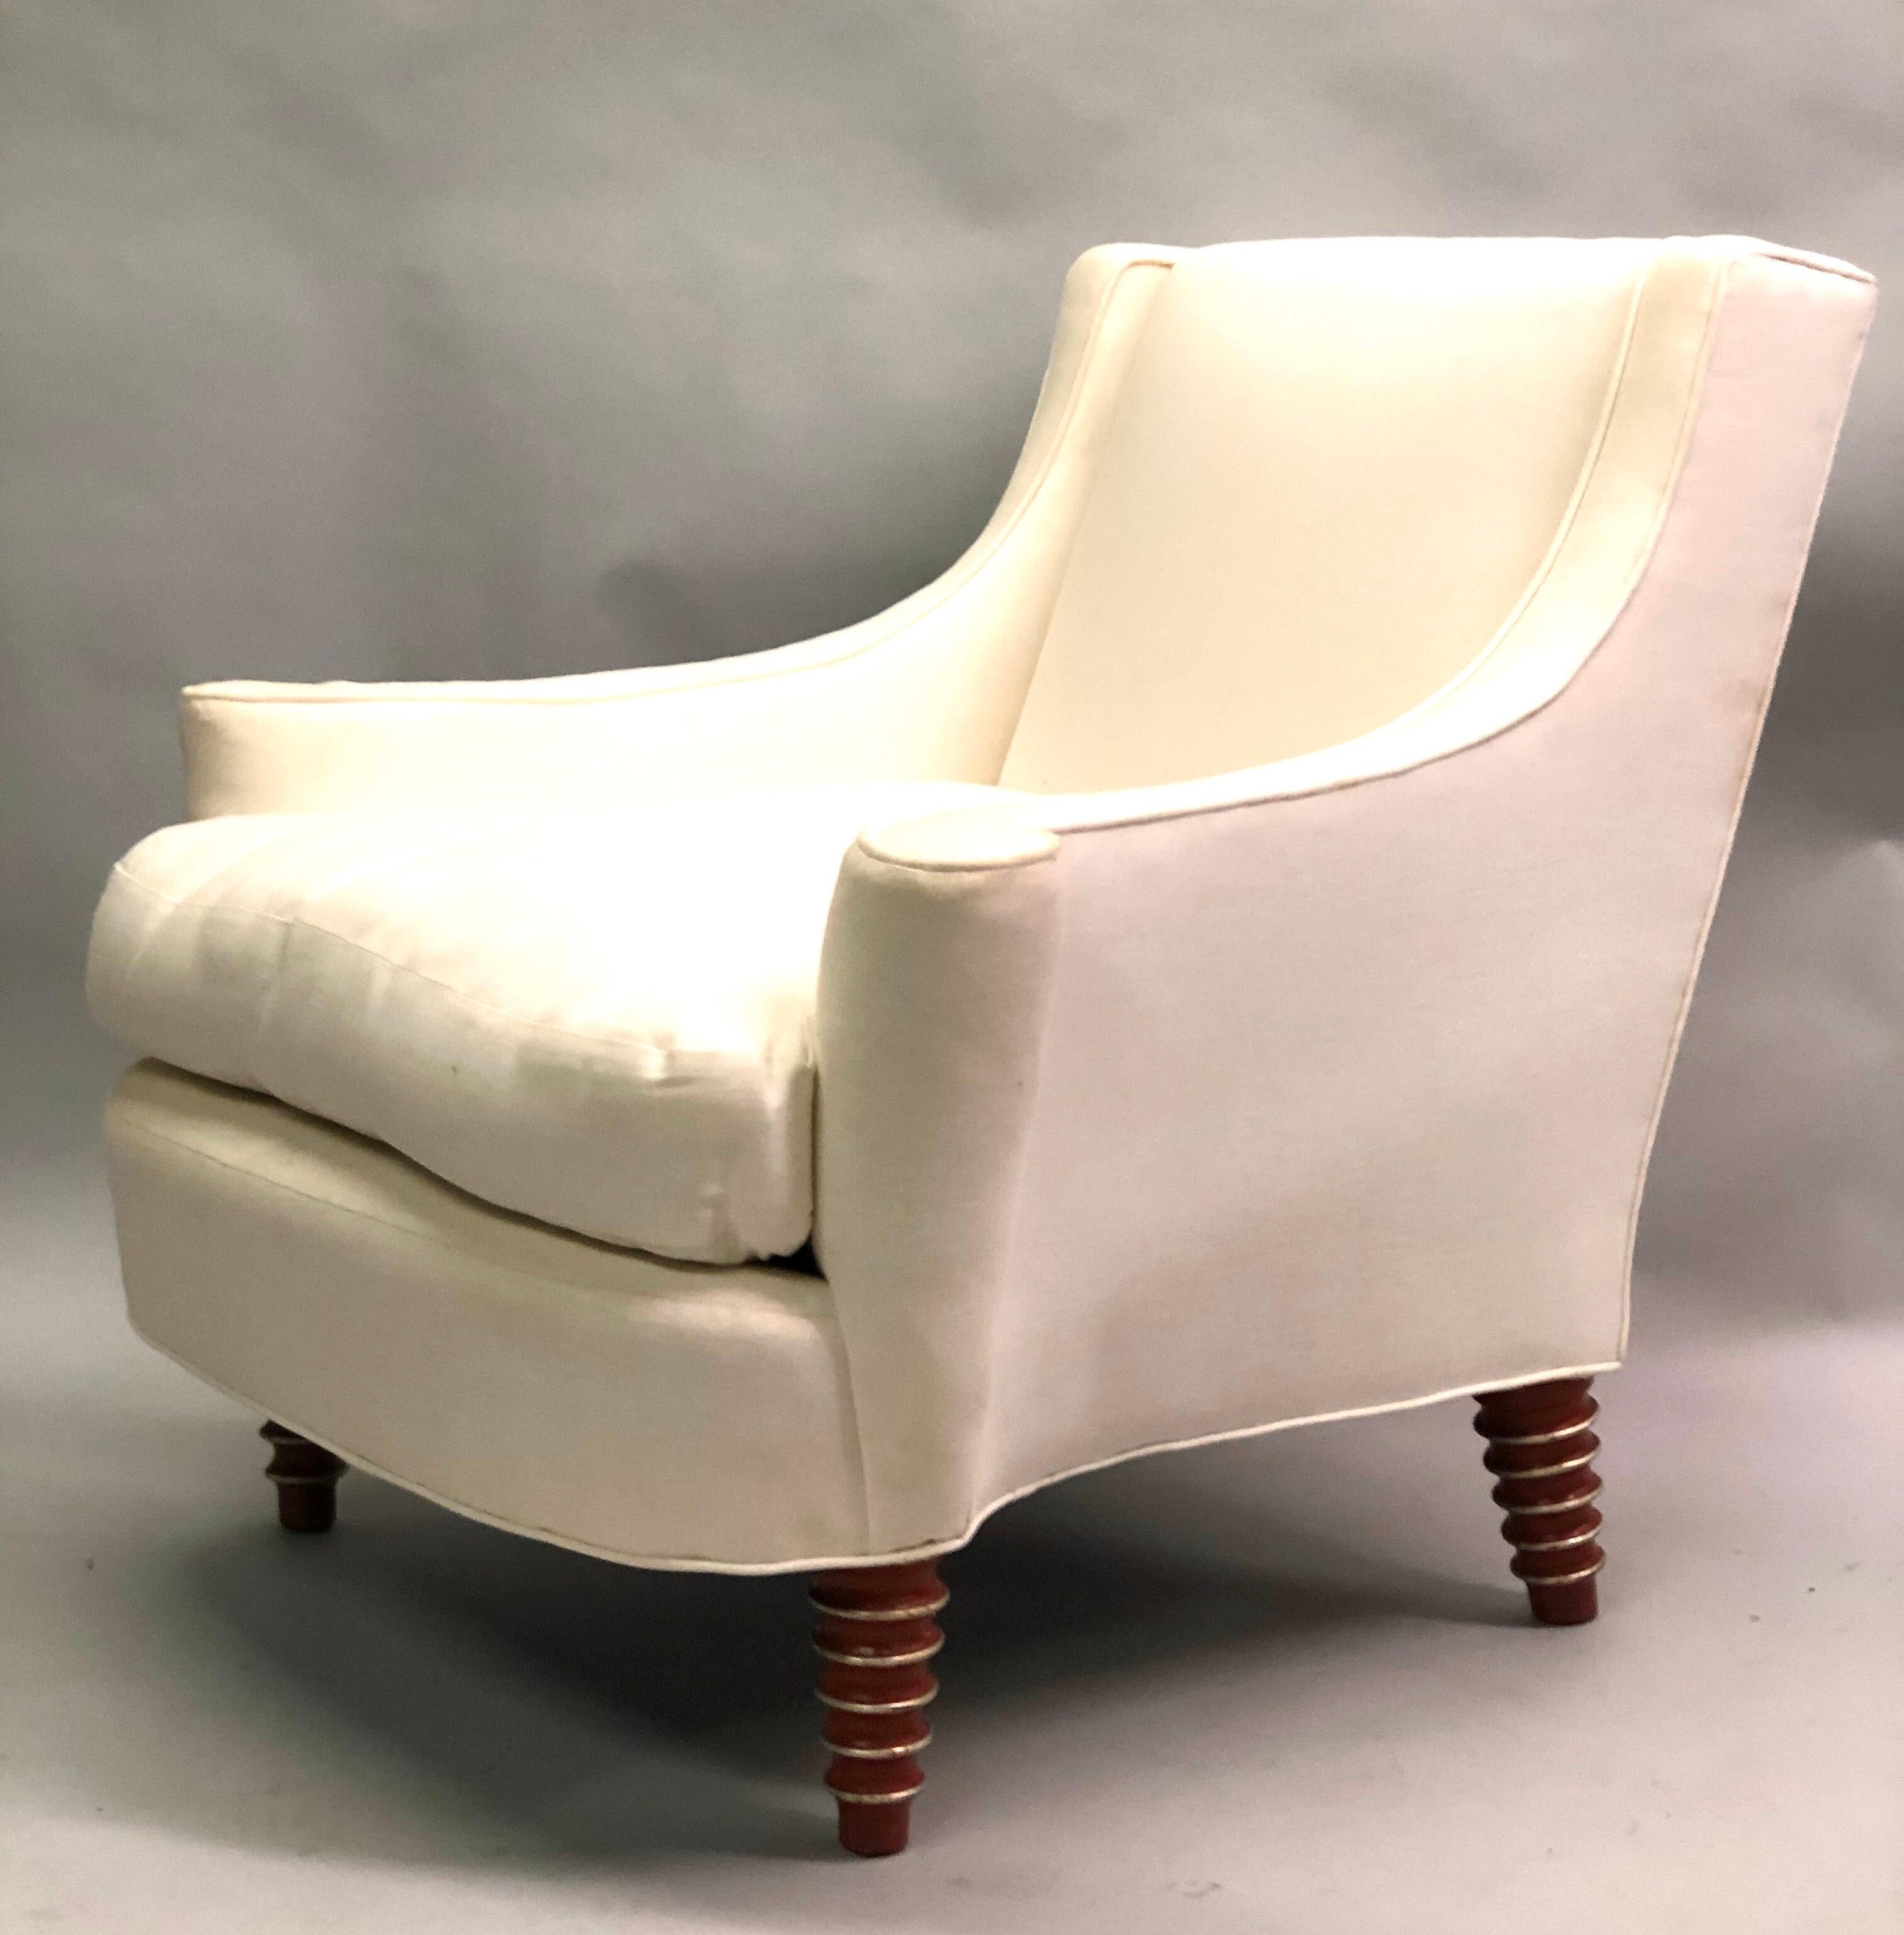 Custom pair of French modern neoclassical lounge chairs or armchairs designed by New York decorator Howard Elliot and manufactured by Maison Jansen. The chairs utilize a classic Maison Jansen form: the legs are hand carved and tapered utilizing a